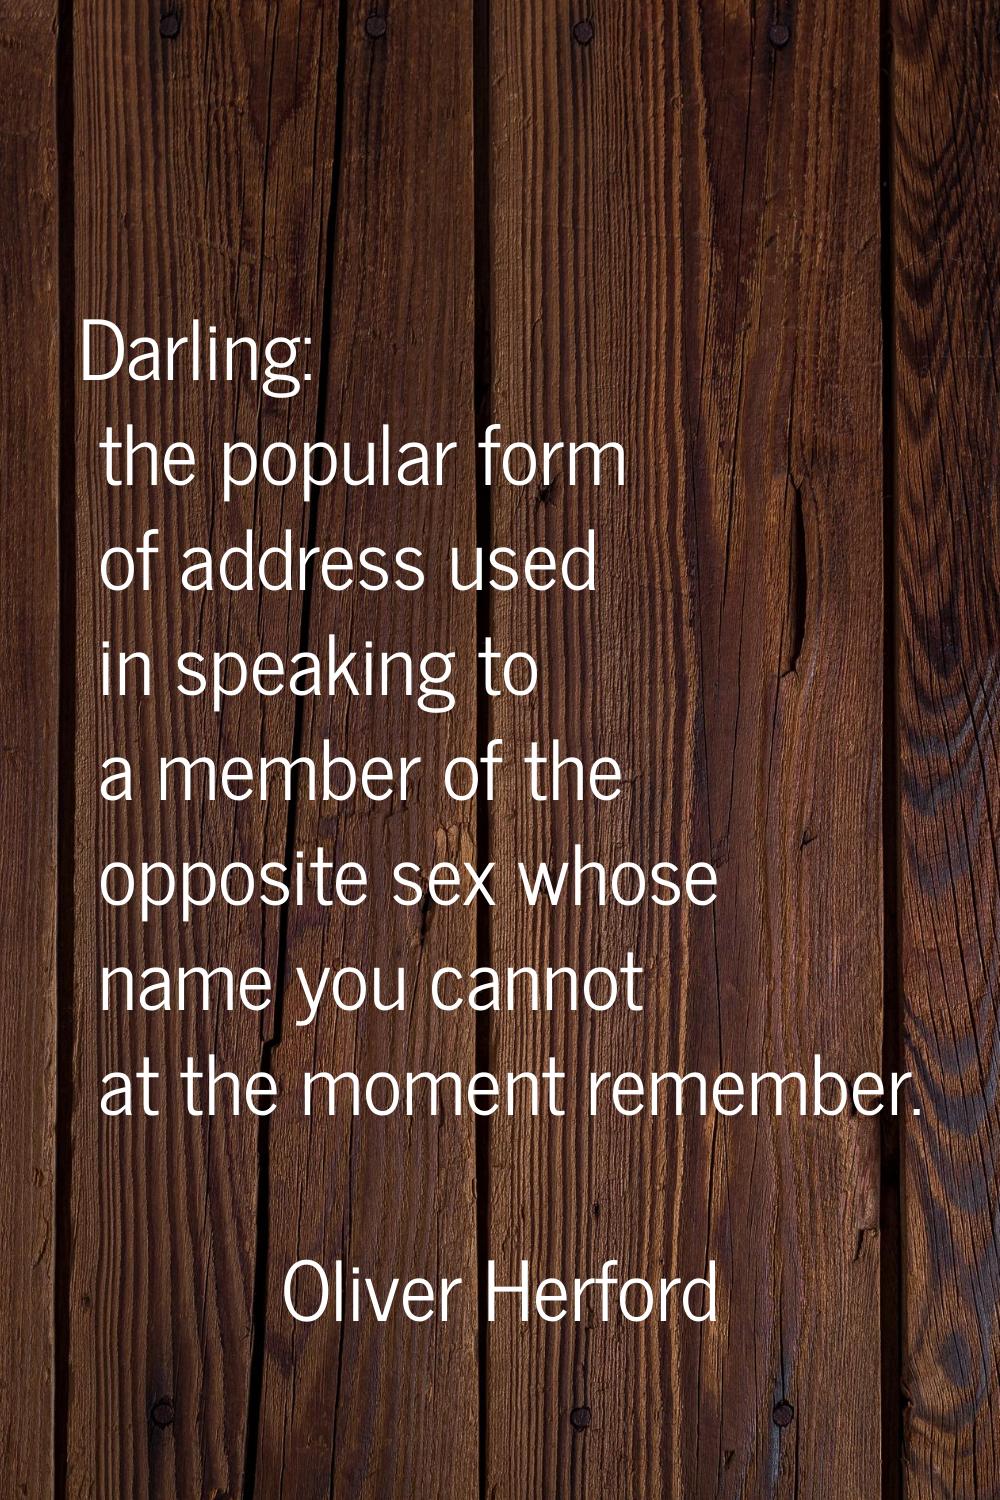 Darling: the popular form of address used in speaking to a member of the opposite sex whose name yo